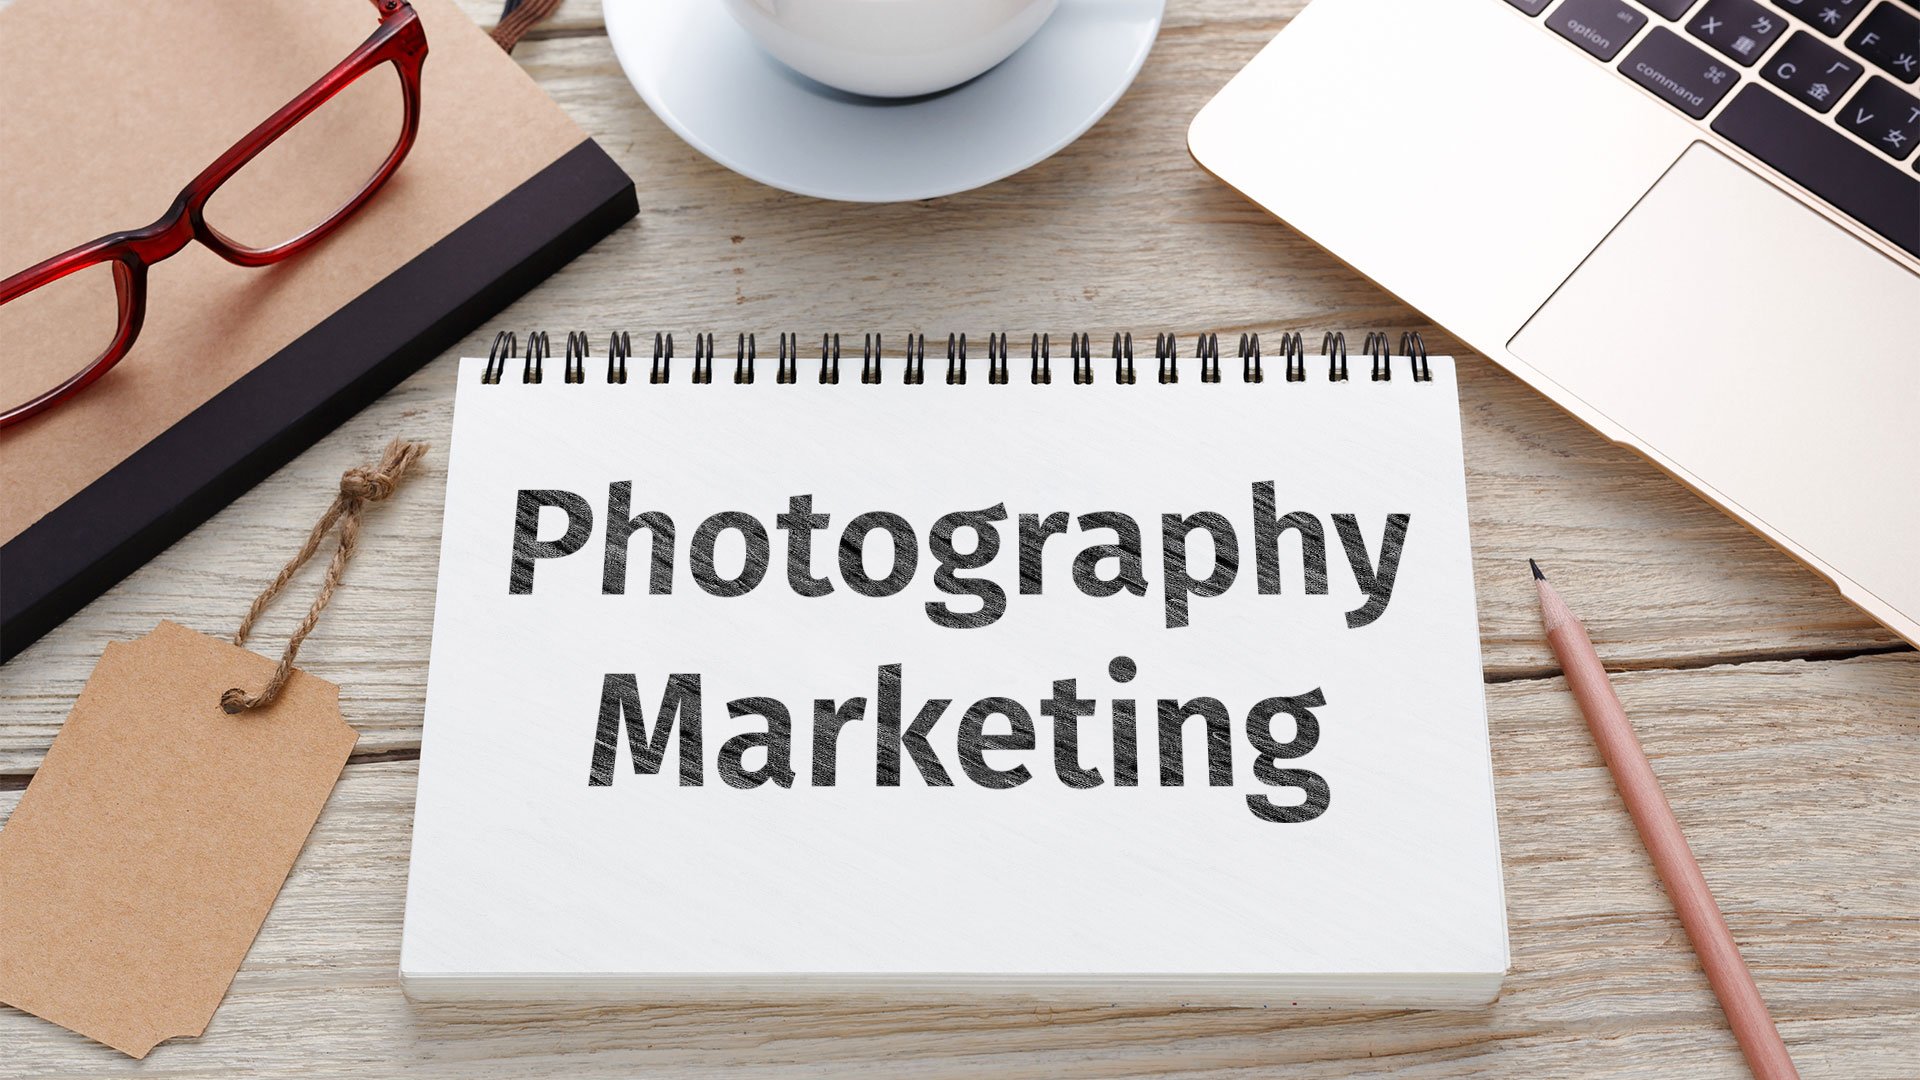 Photography Marketing: Studio Management and CRM Tools are Key to Success